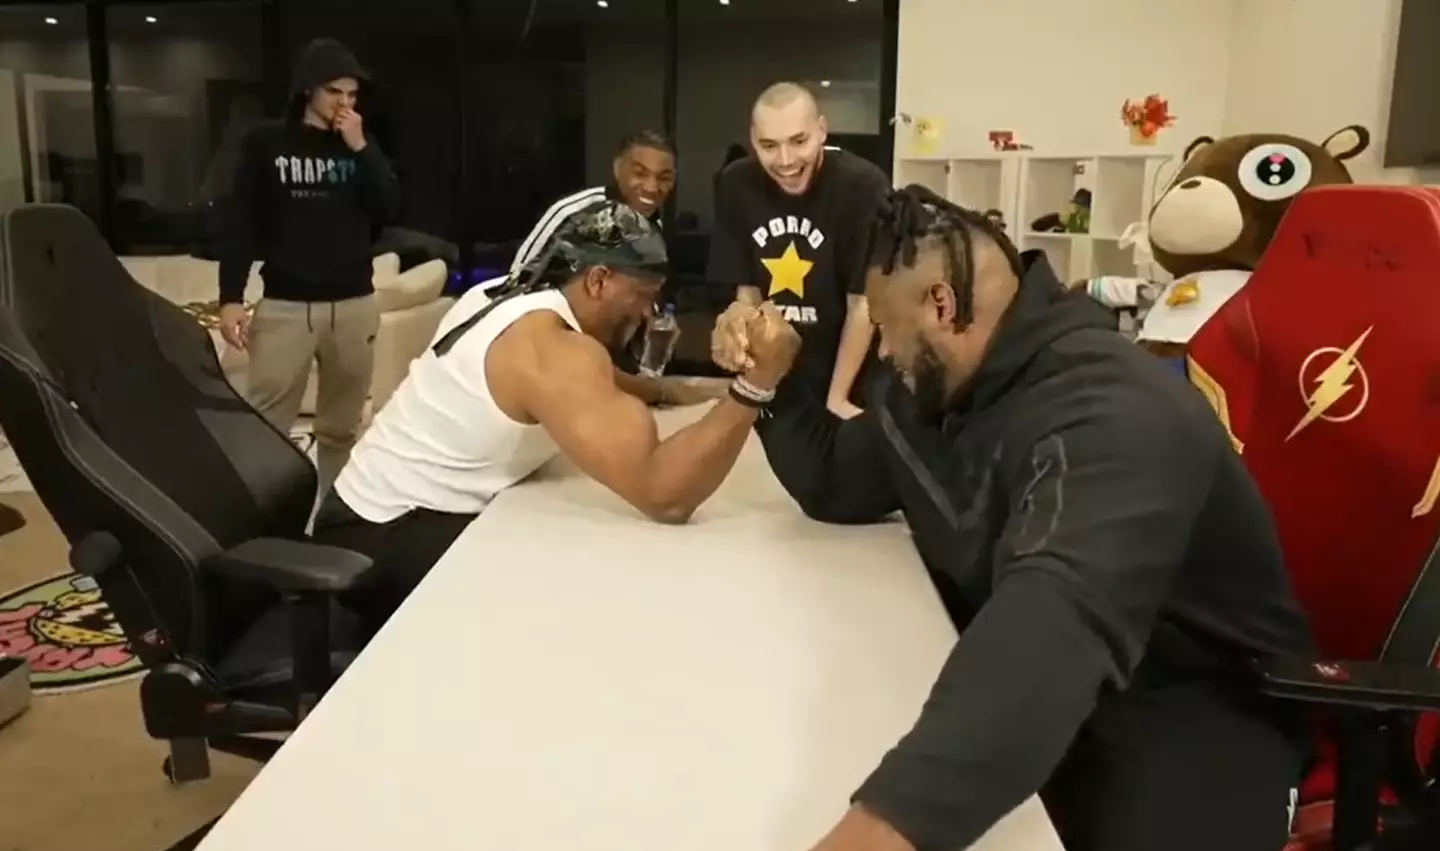 Adin Ross' bodyguard Ant got into an arm wrestling competition live on stream.